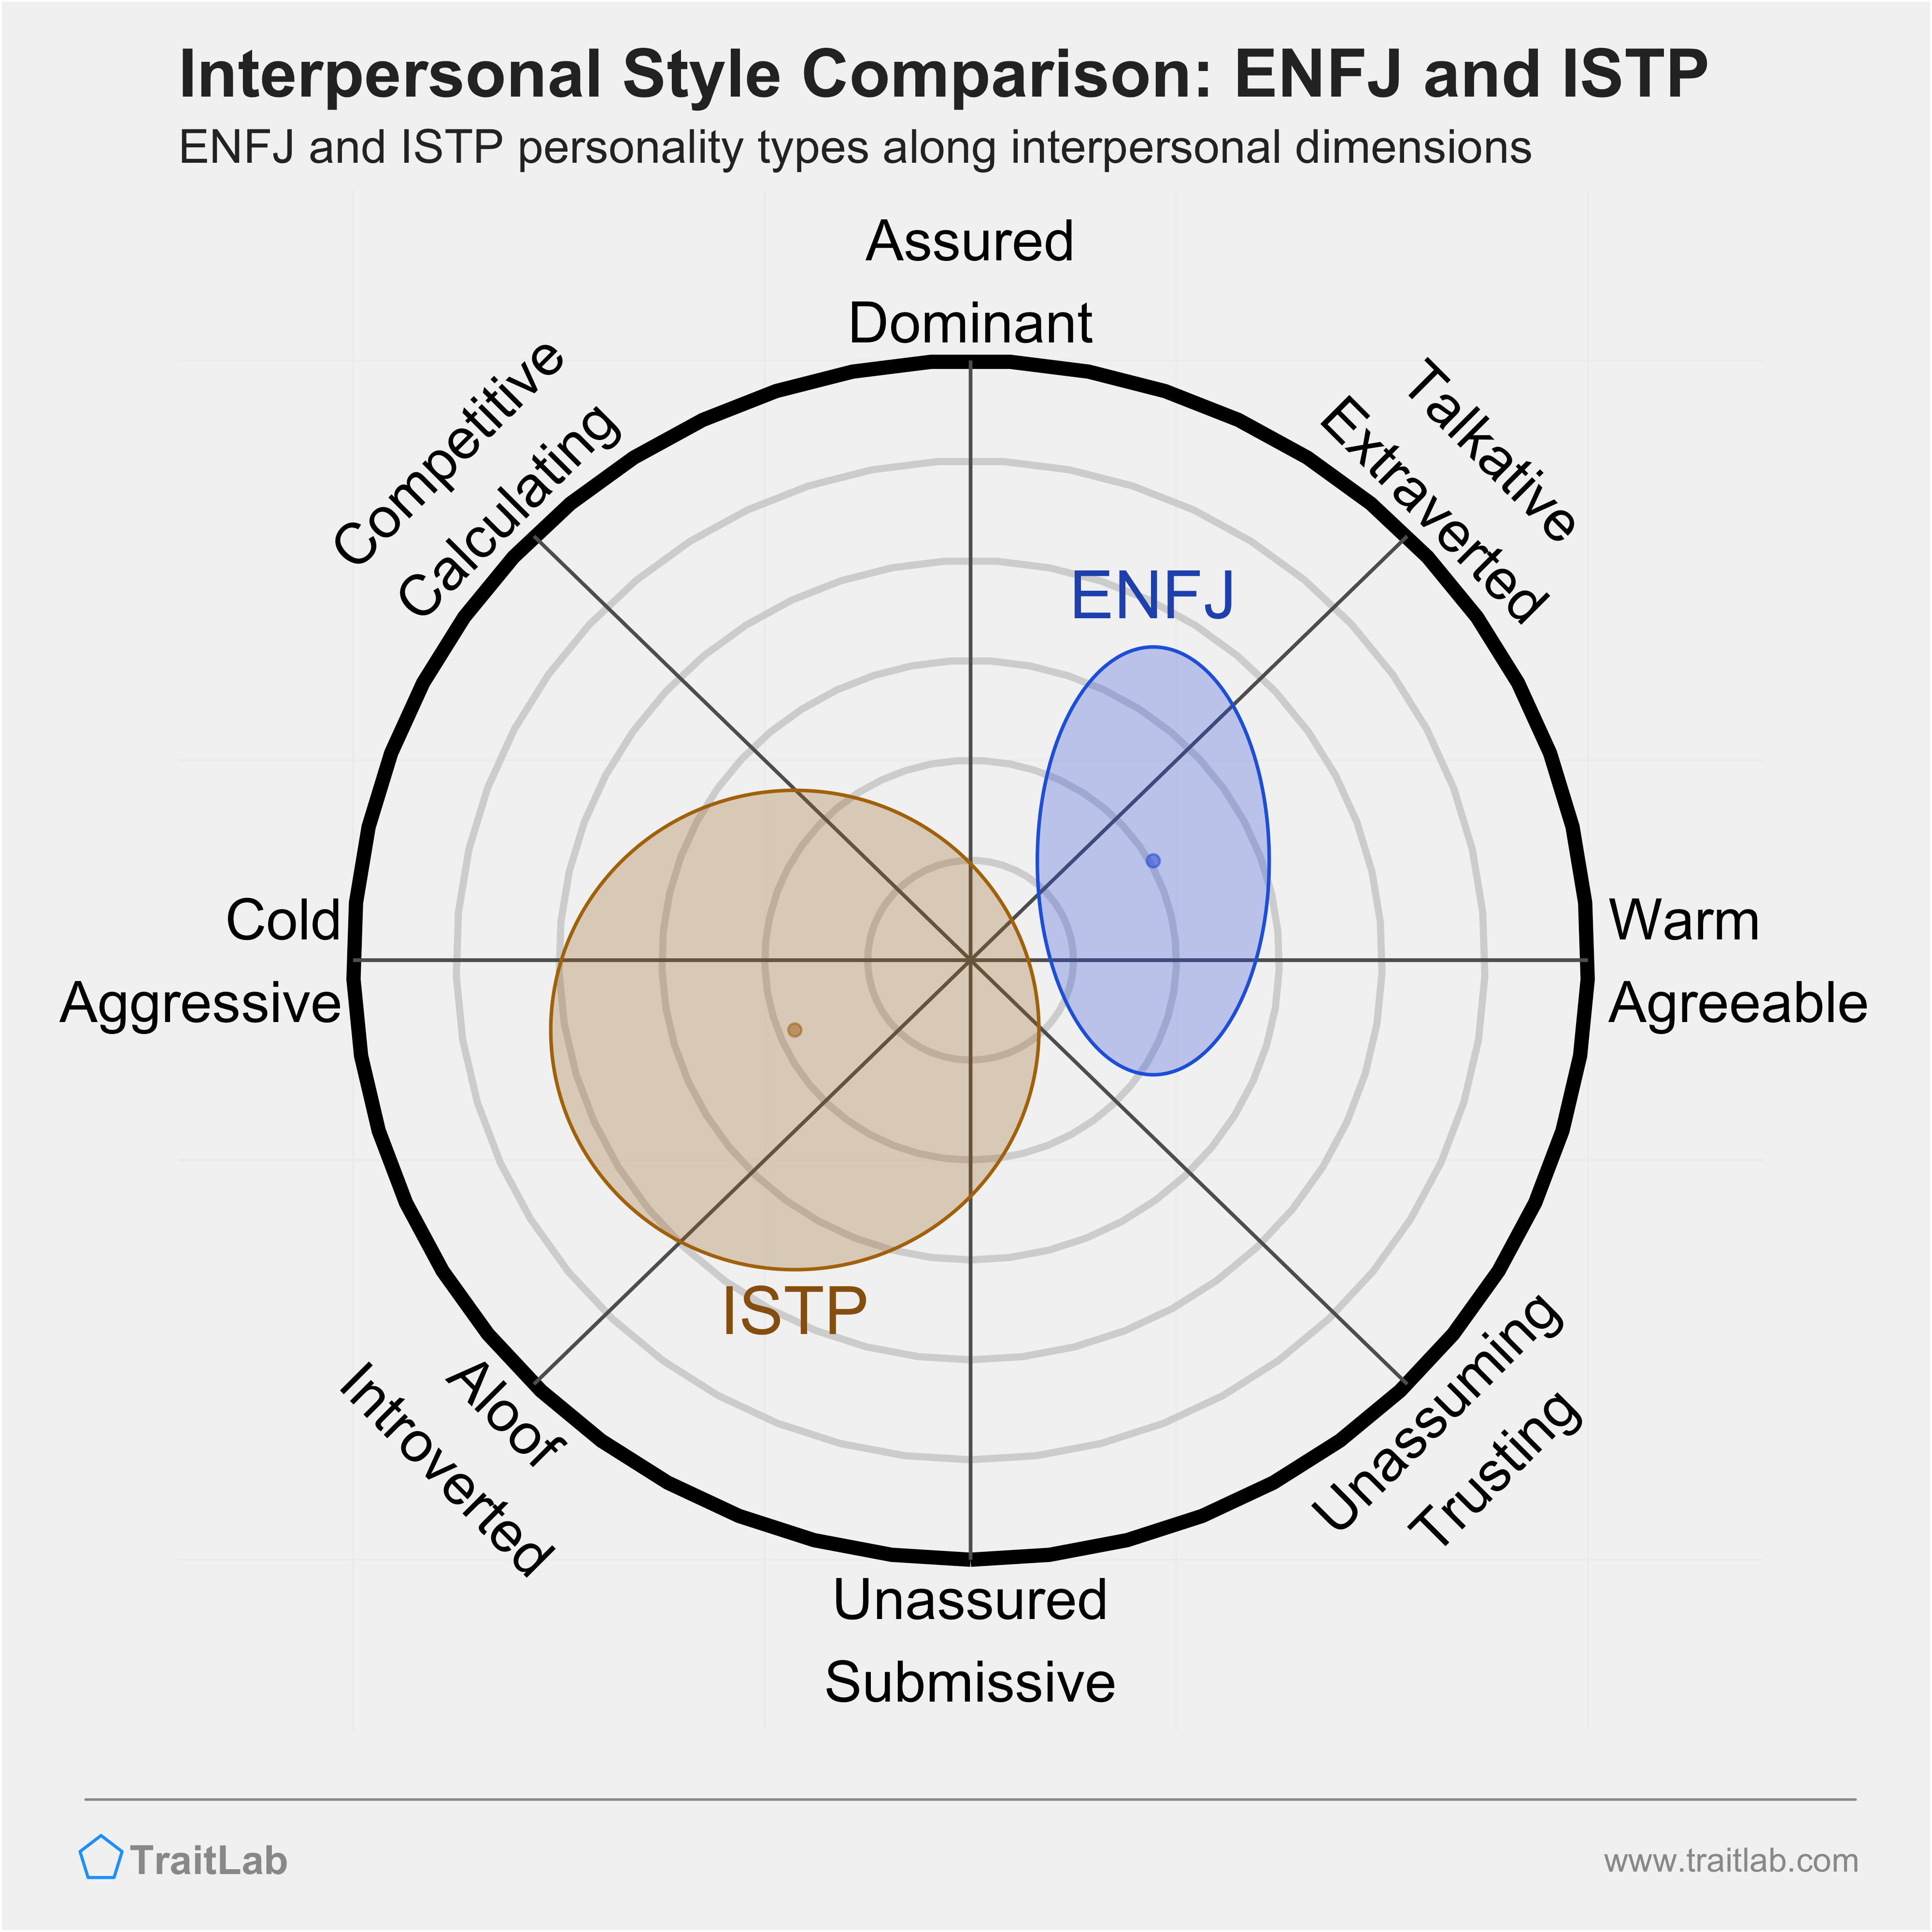 ENFJ and ISTP comparison across interpersonal dimensions